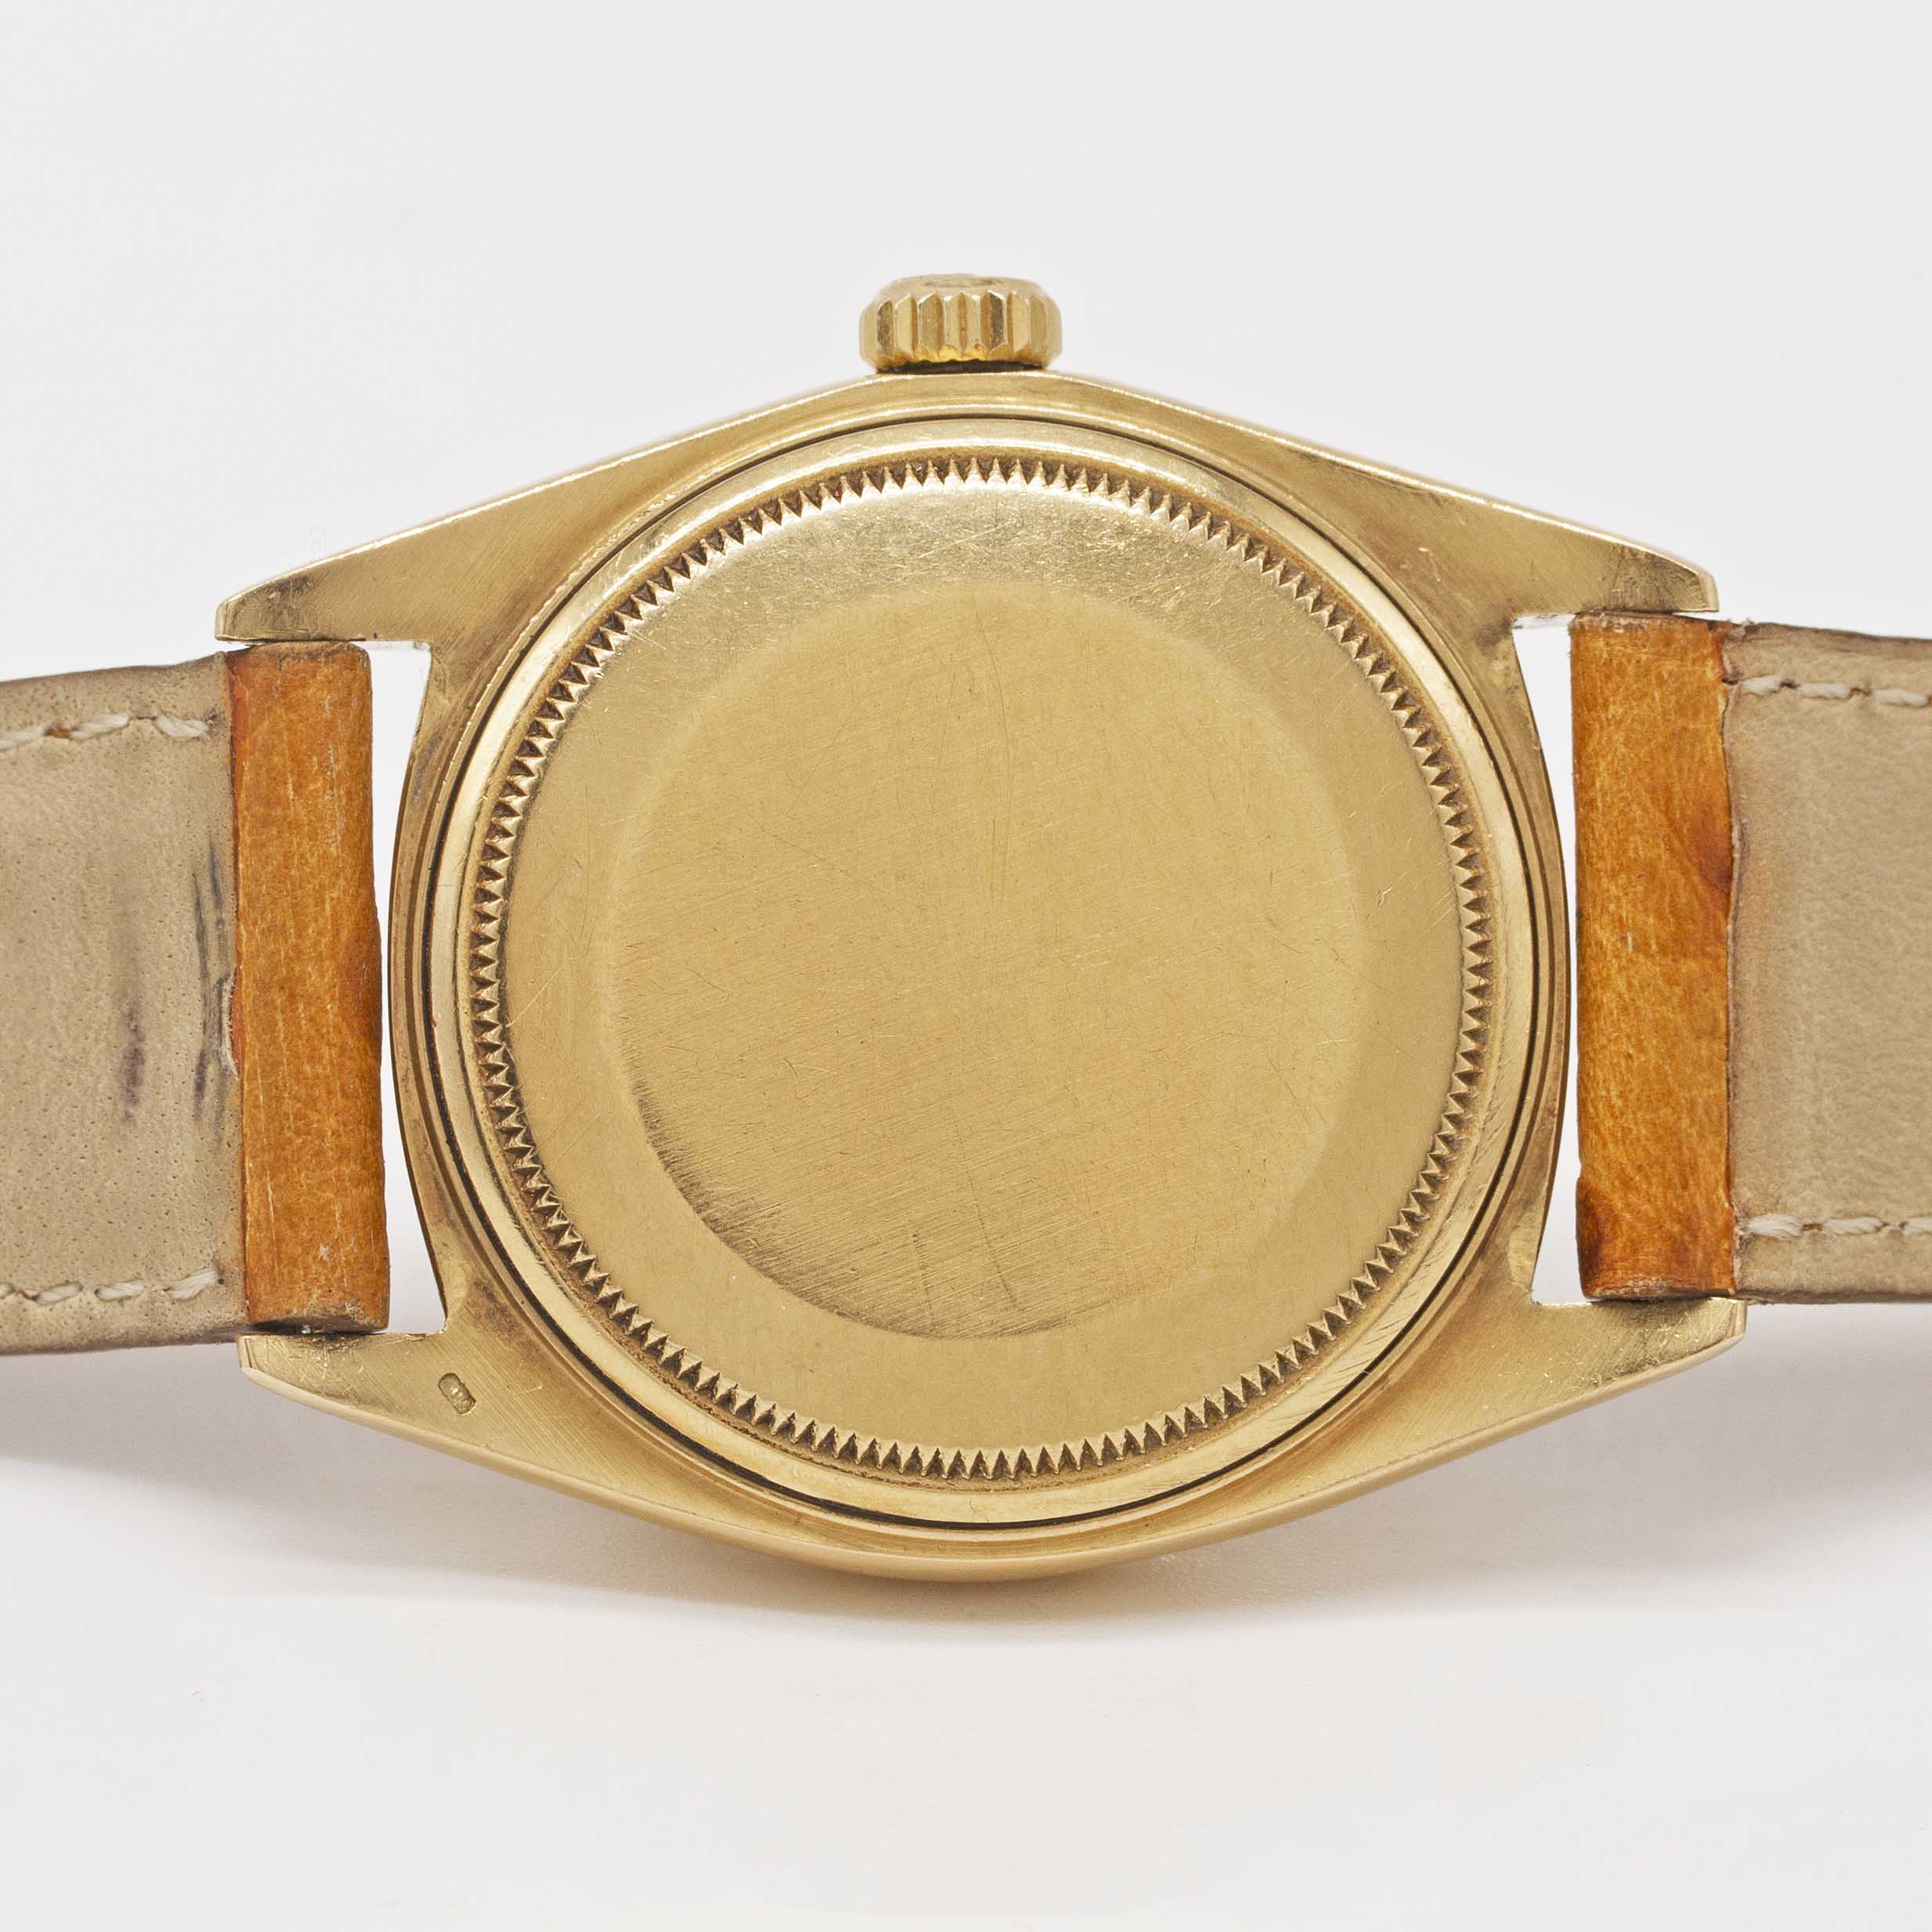 A GENTLEMAN'S 18K SOLID YELLOW GOLD ROLEX OYSTER PERPETUAL DAY DATE WRIST WATCH CIRCA 1963, REF. - Image 5 of 6